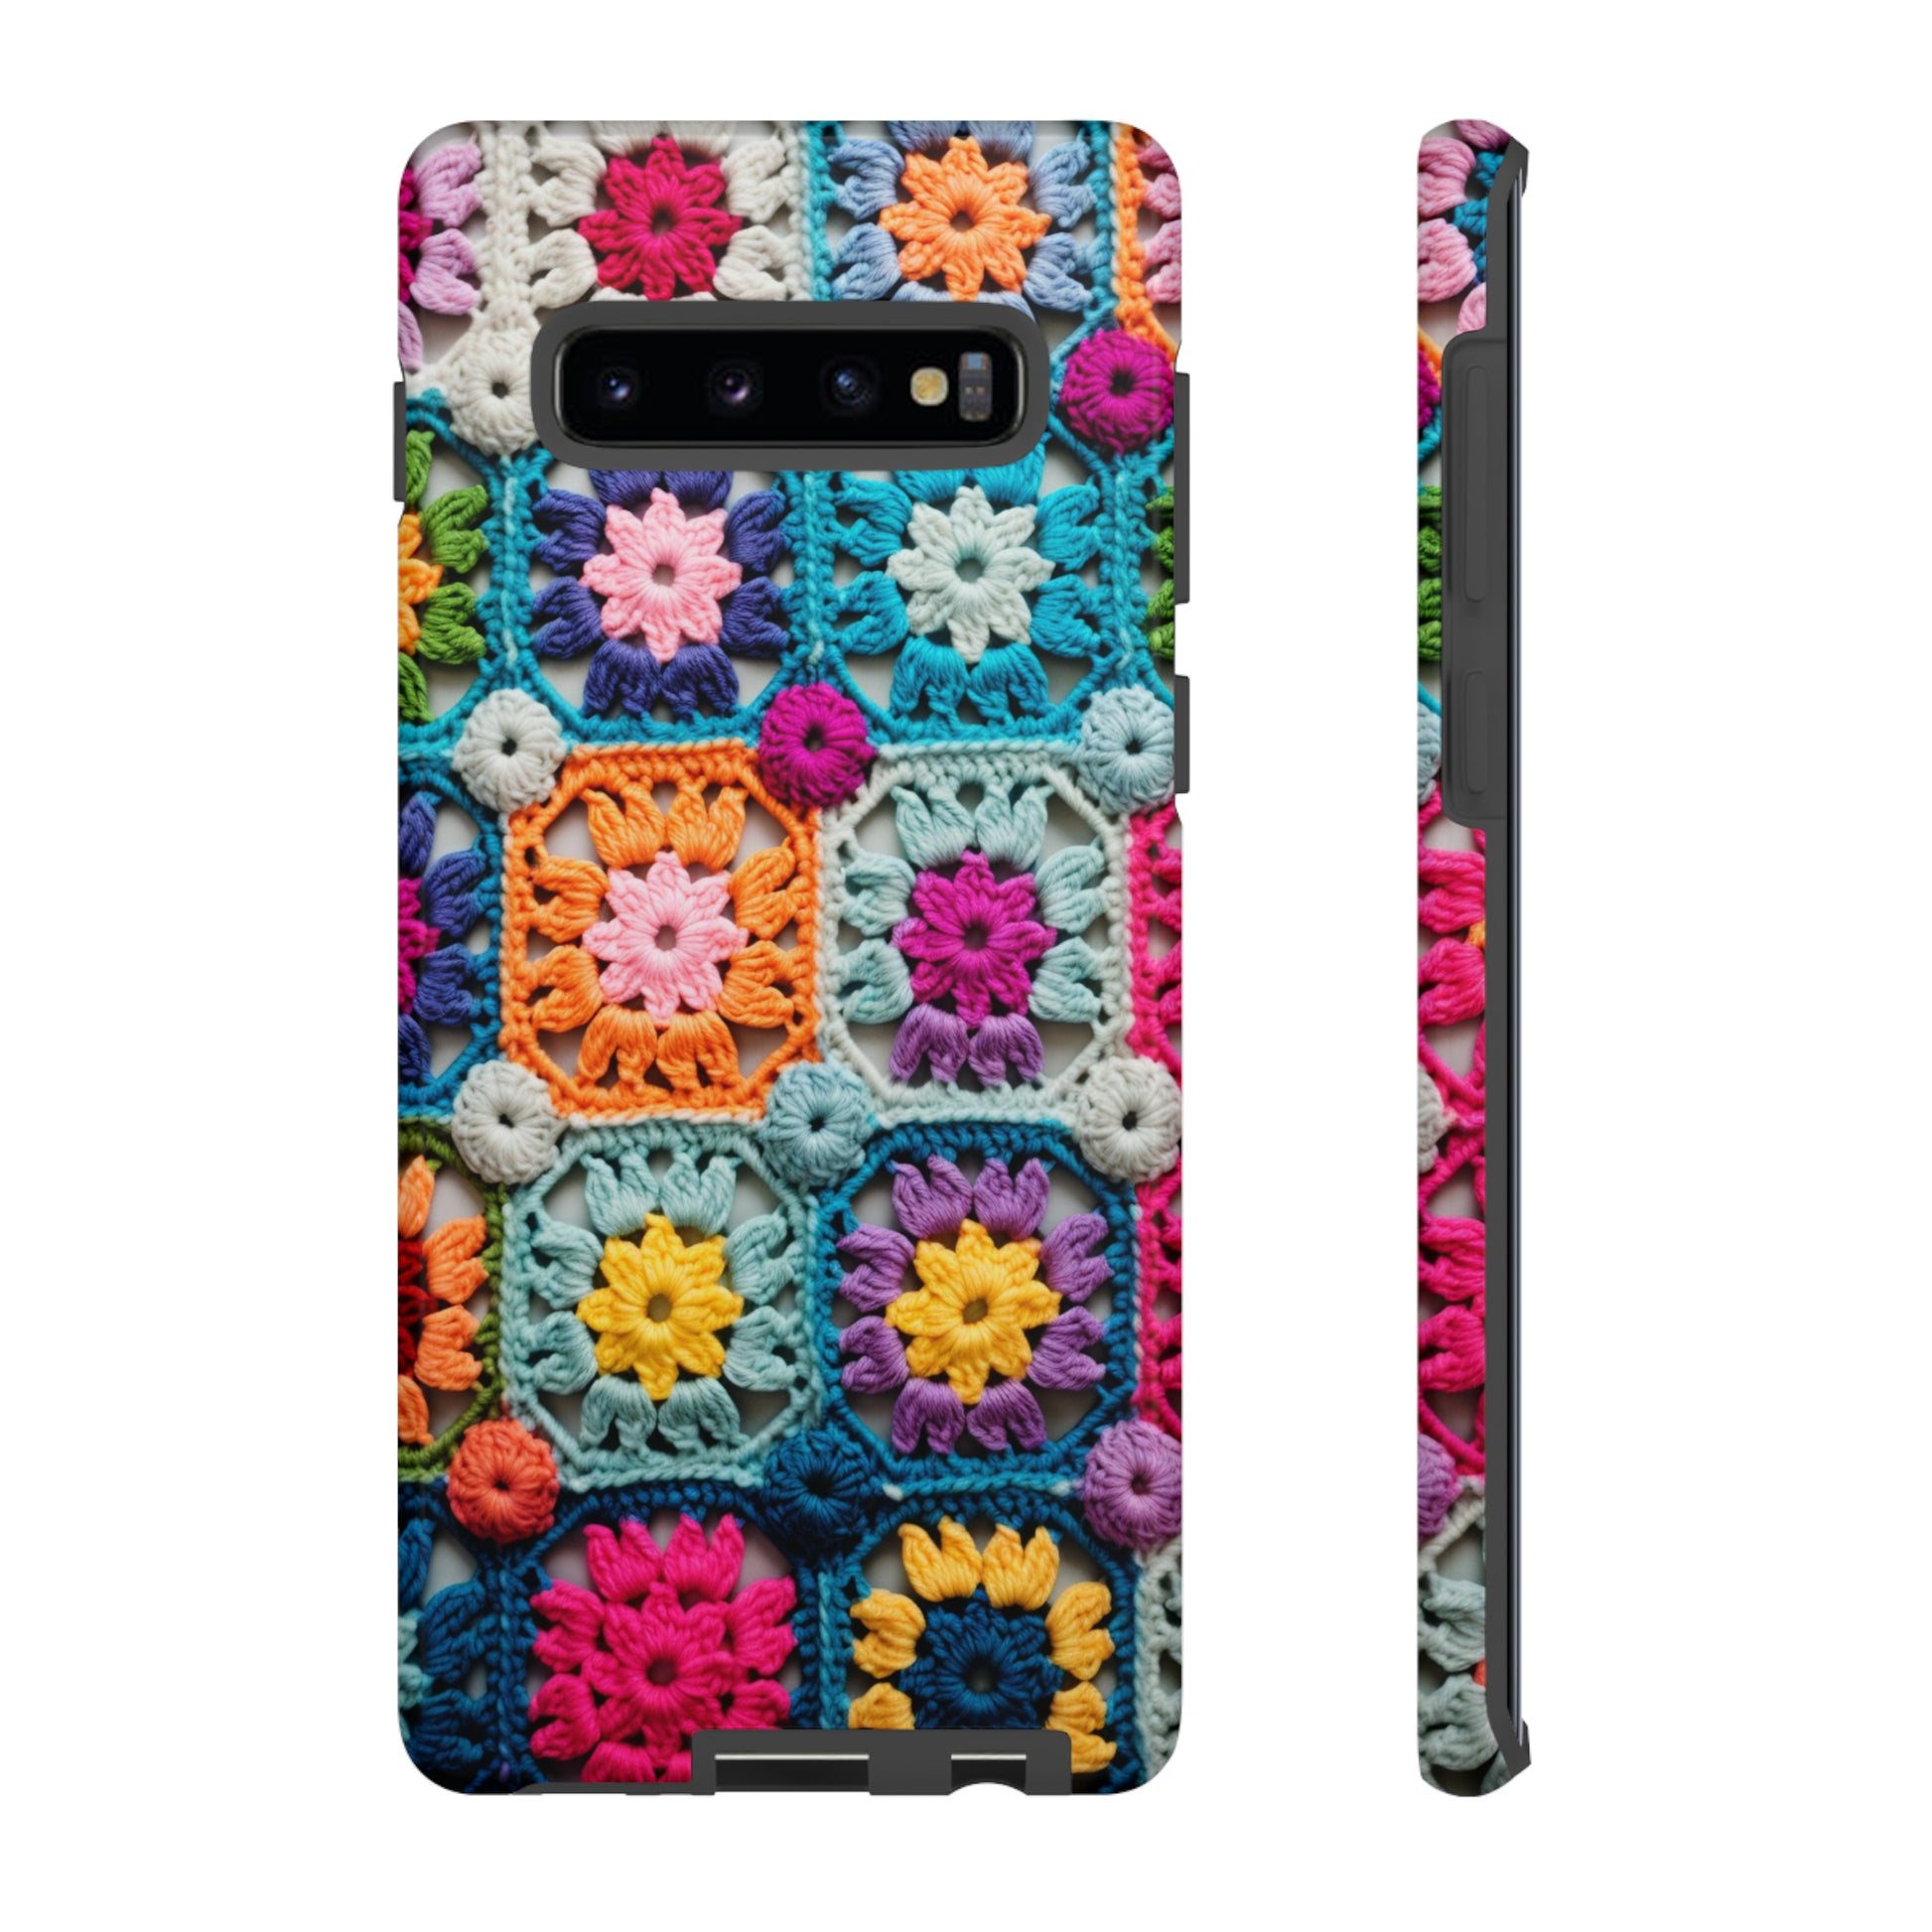 Faux knit granny square phone case in warm fall colors